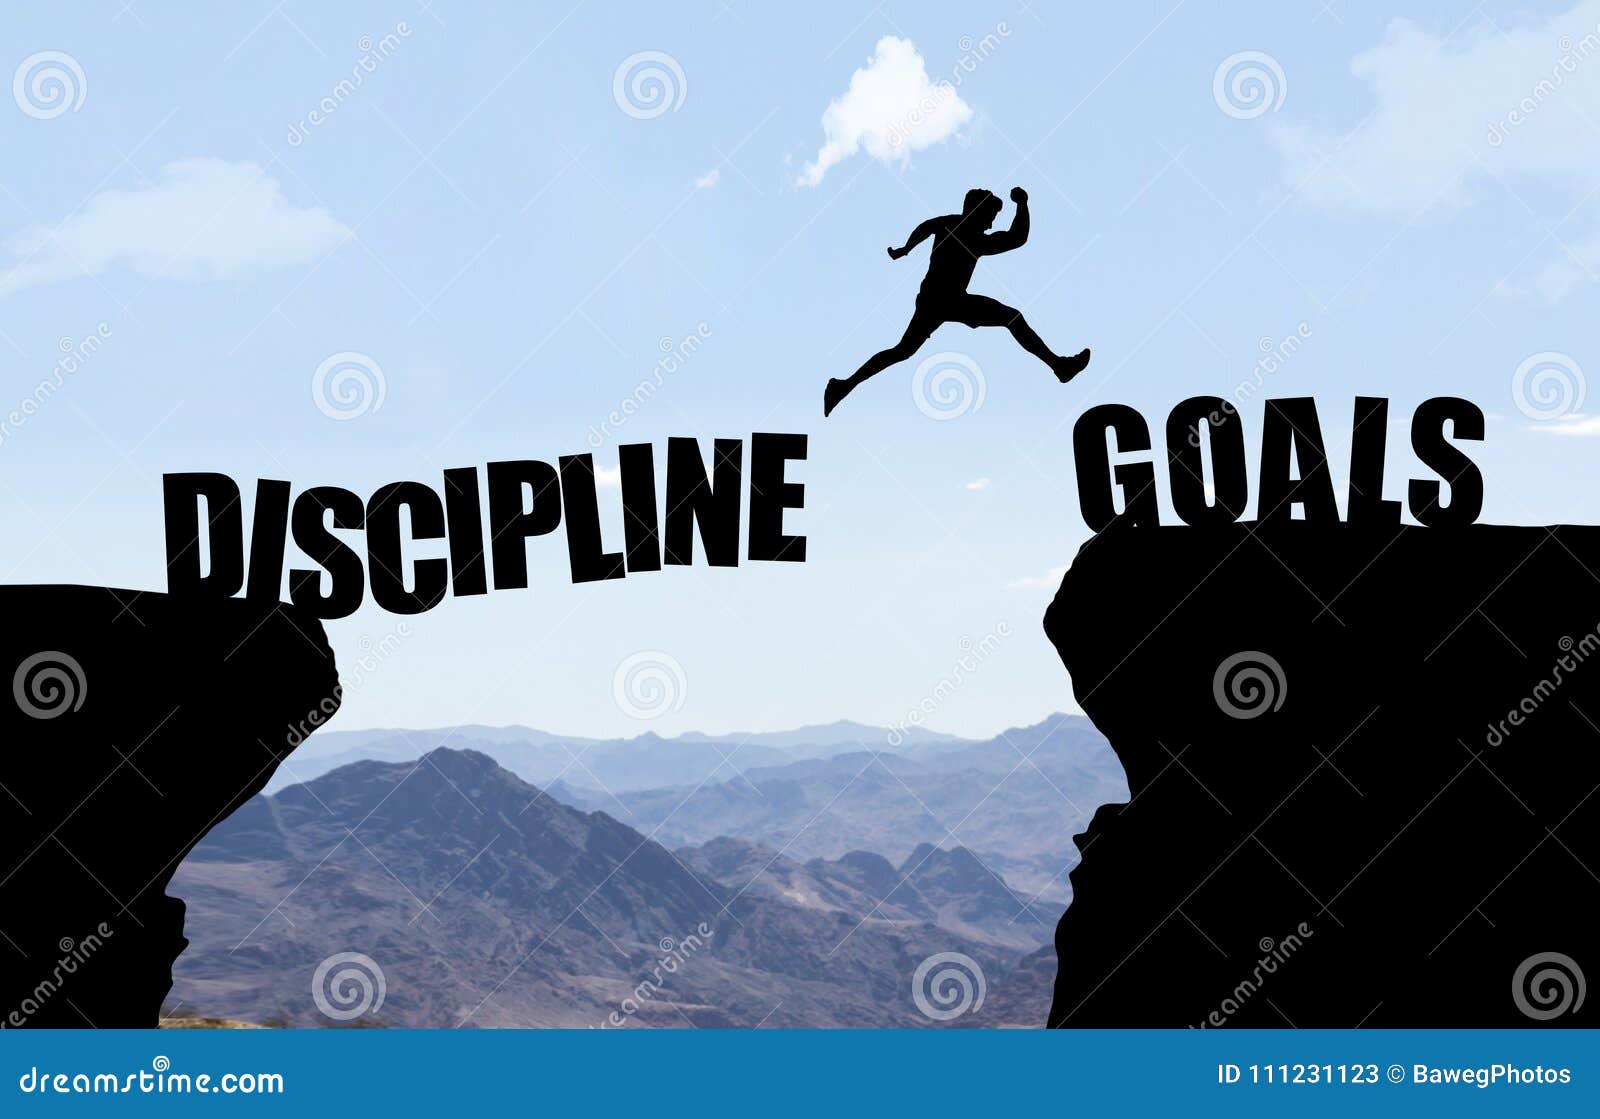 man jumping over abyss with text discipline/goals